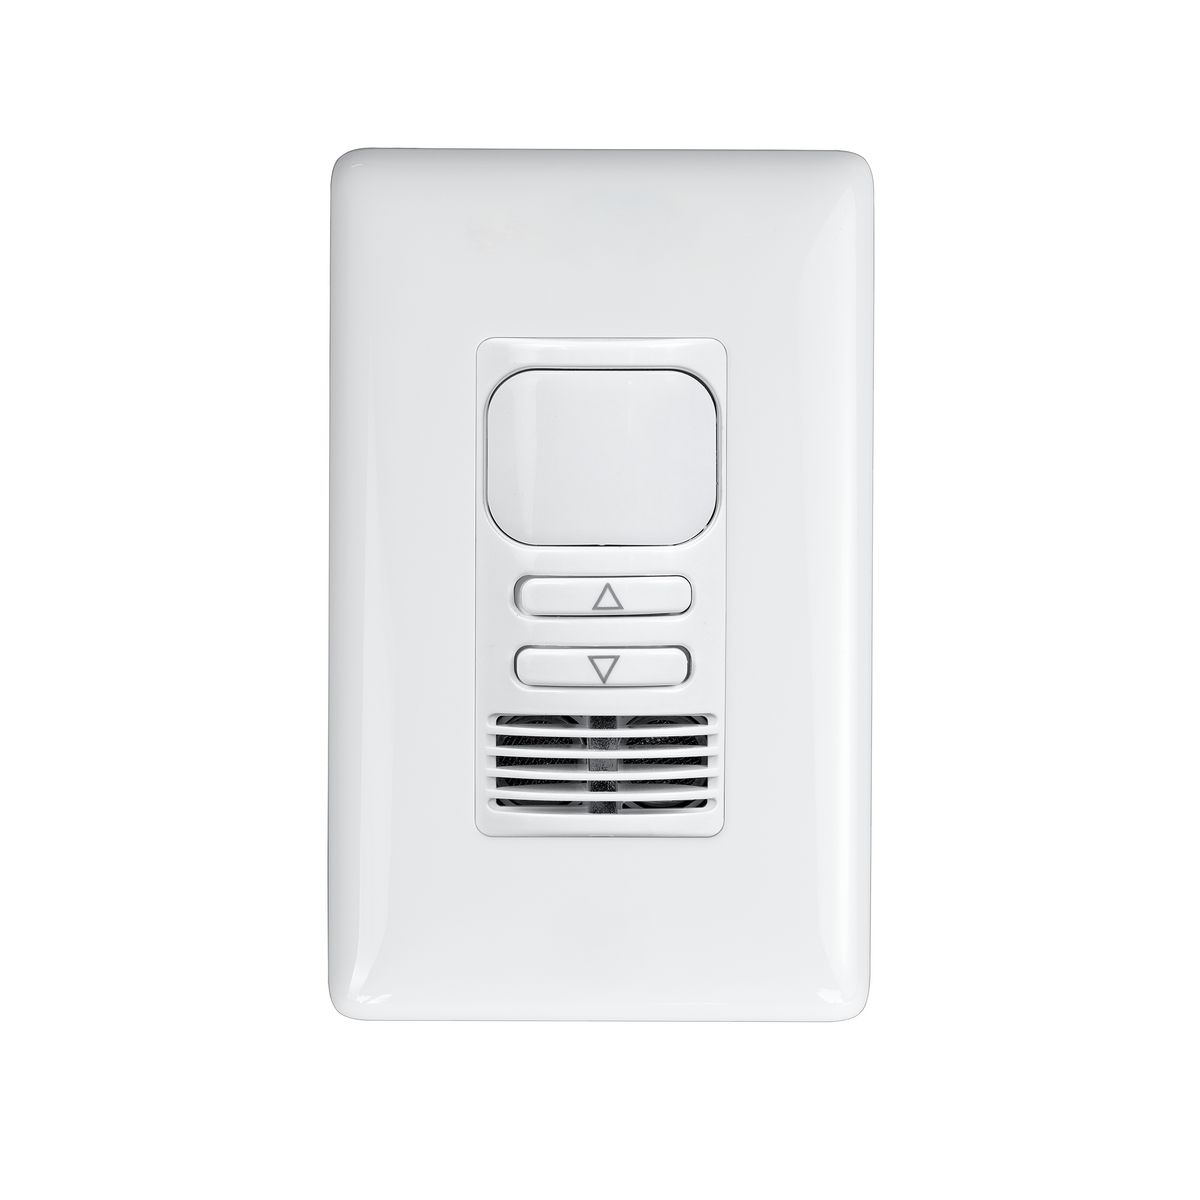 New Hubbell SOM-10-2 Motion Sensor Wall Switch Dual Circuit-White 